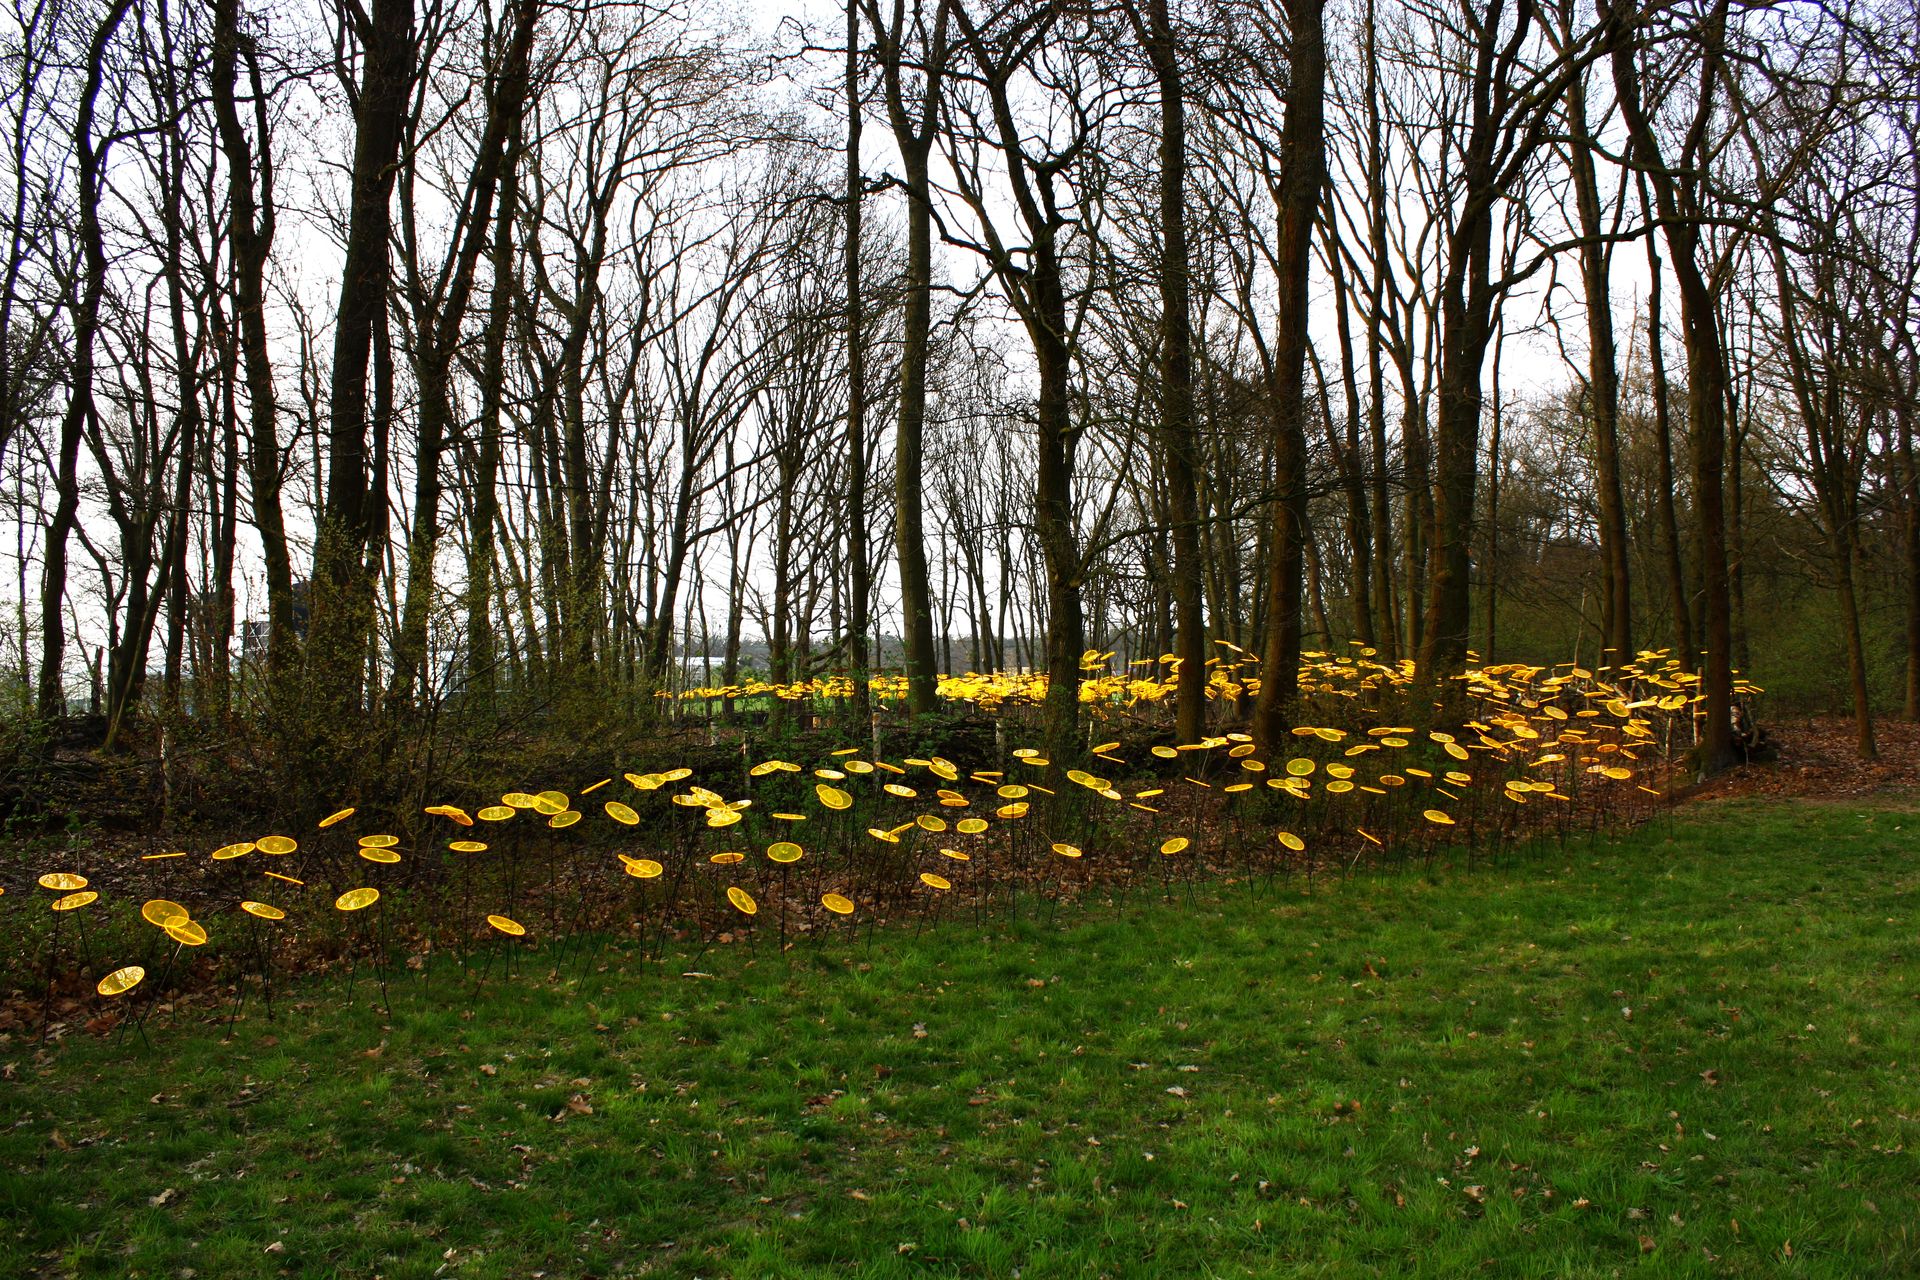 flower bed full of yellow discs